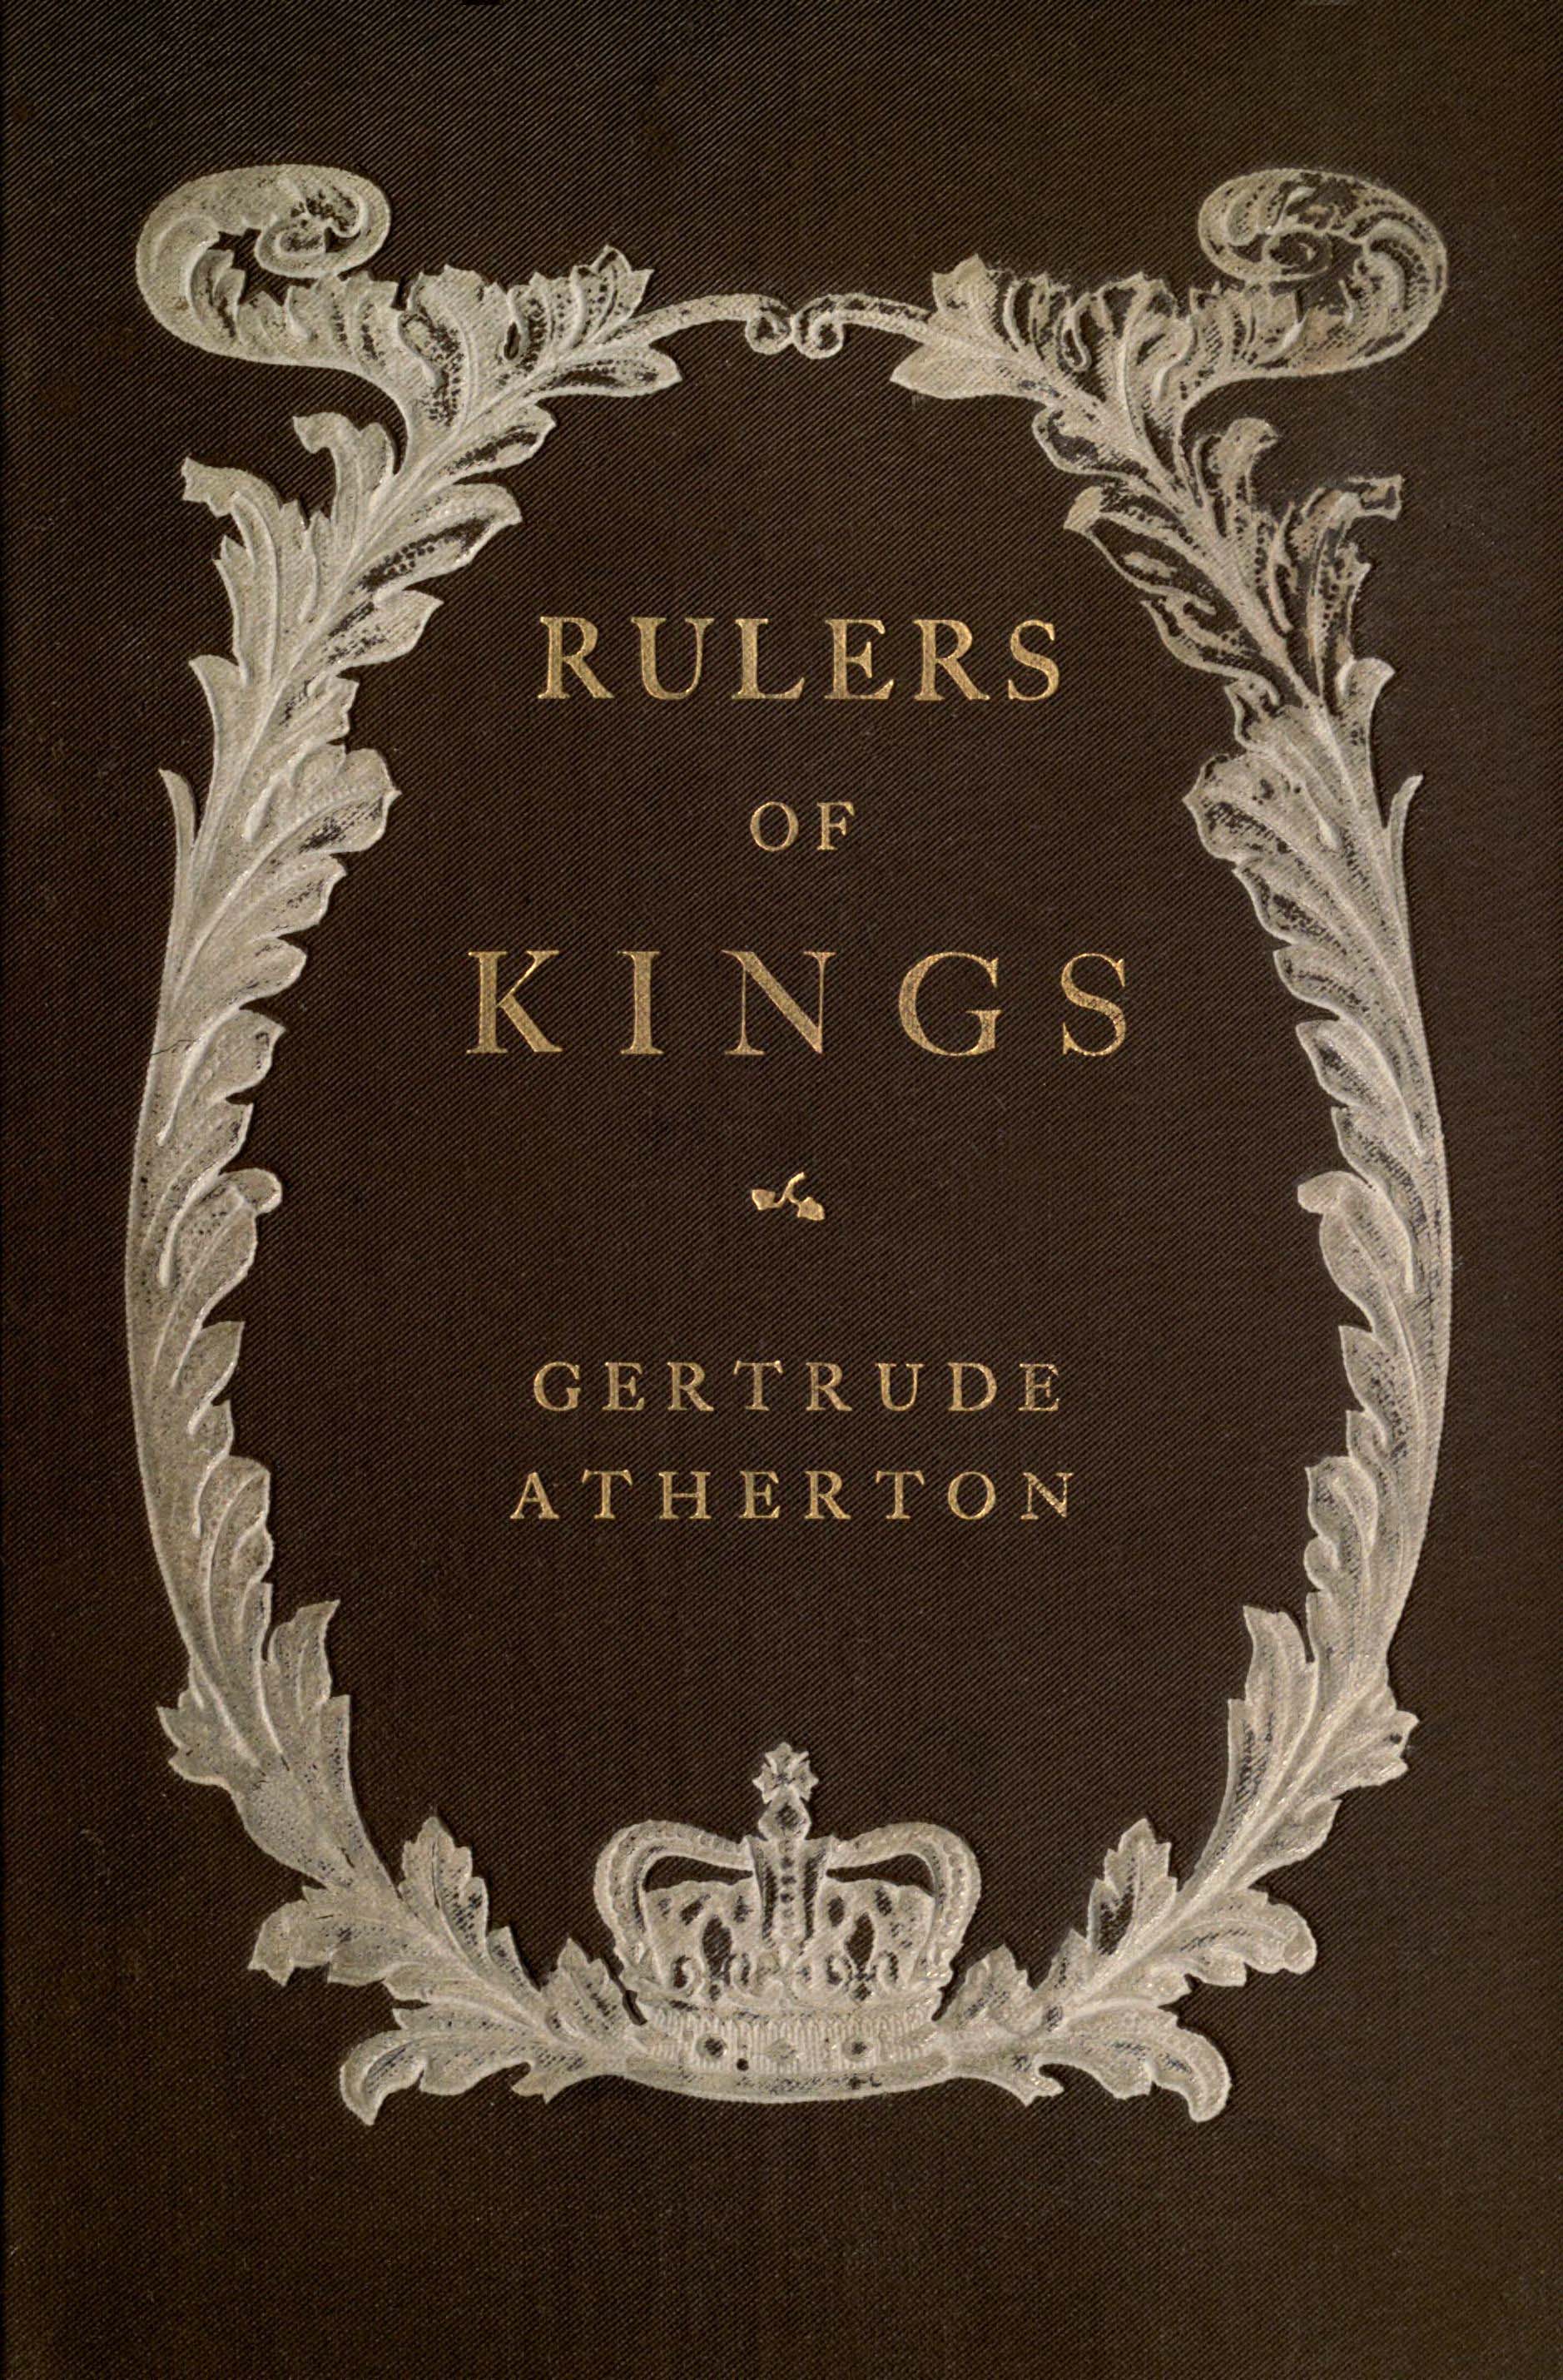 Rulers of kings, by Gertrude Atherton—A Project Gutenberg eBook